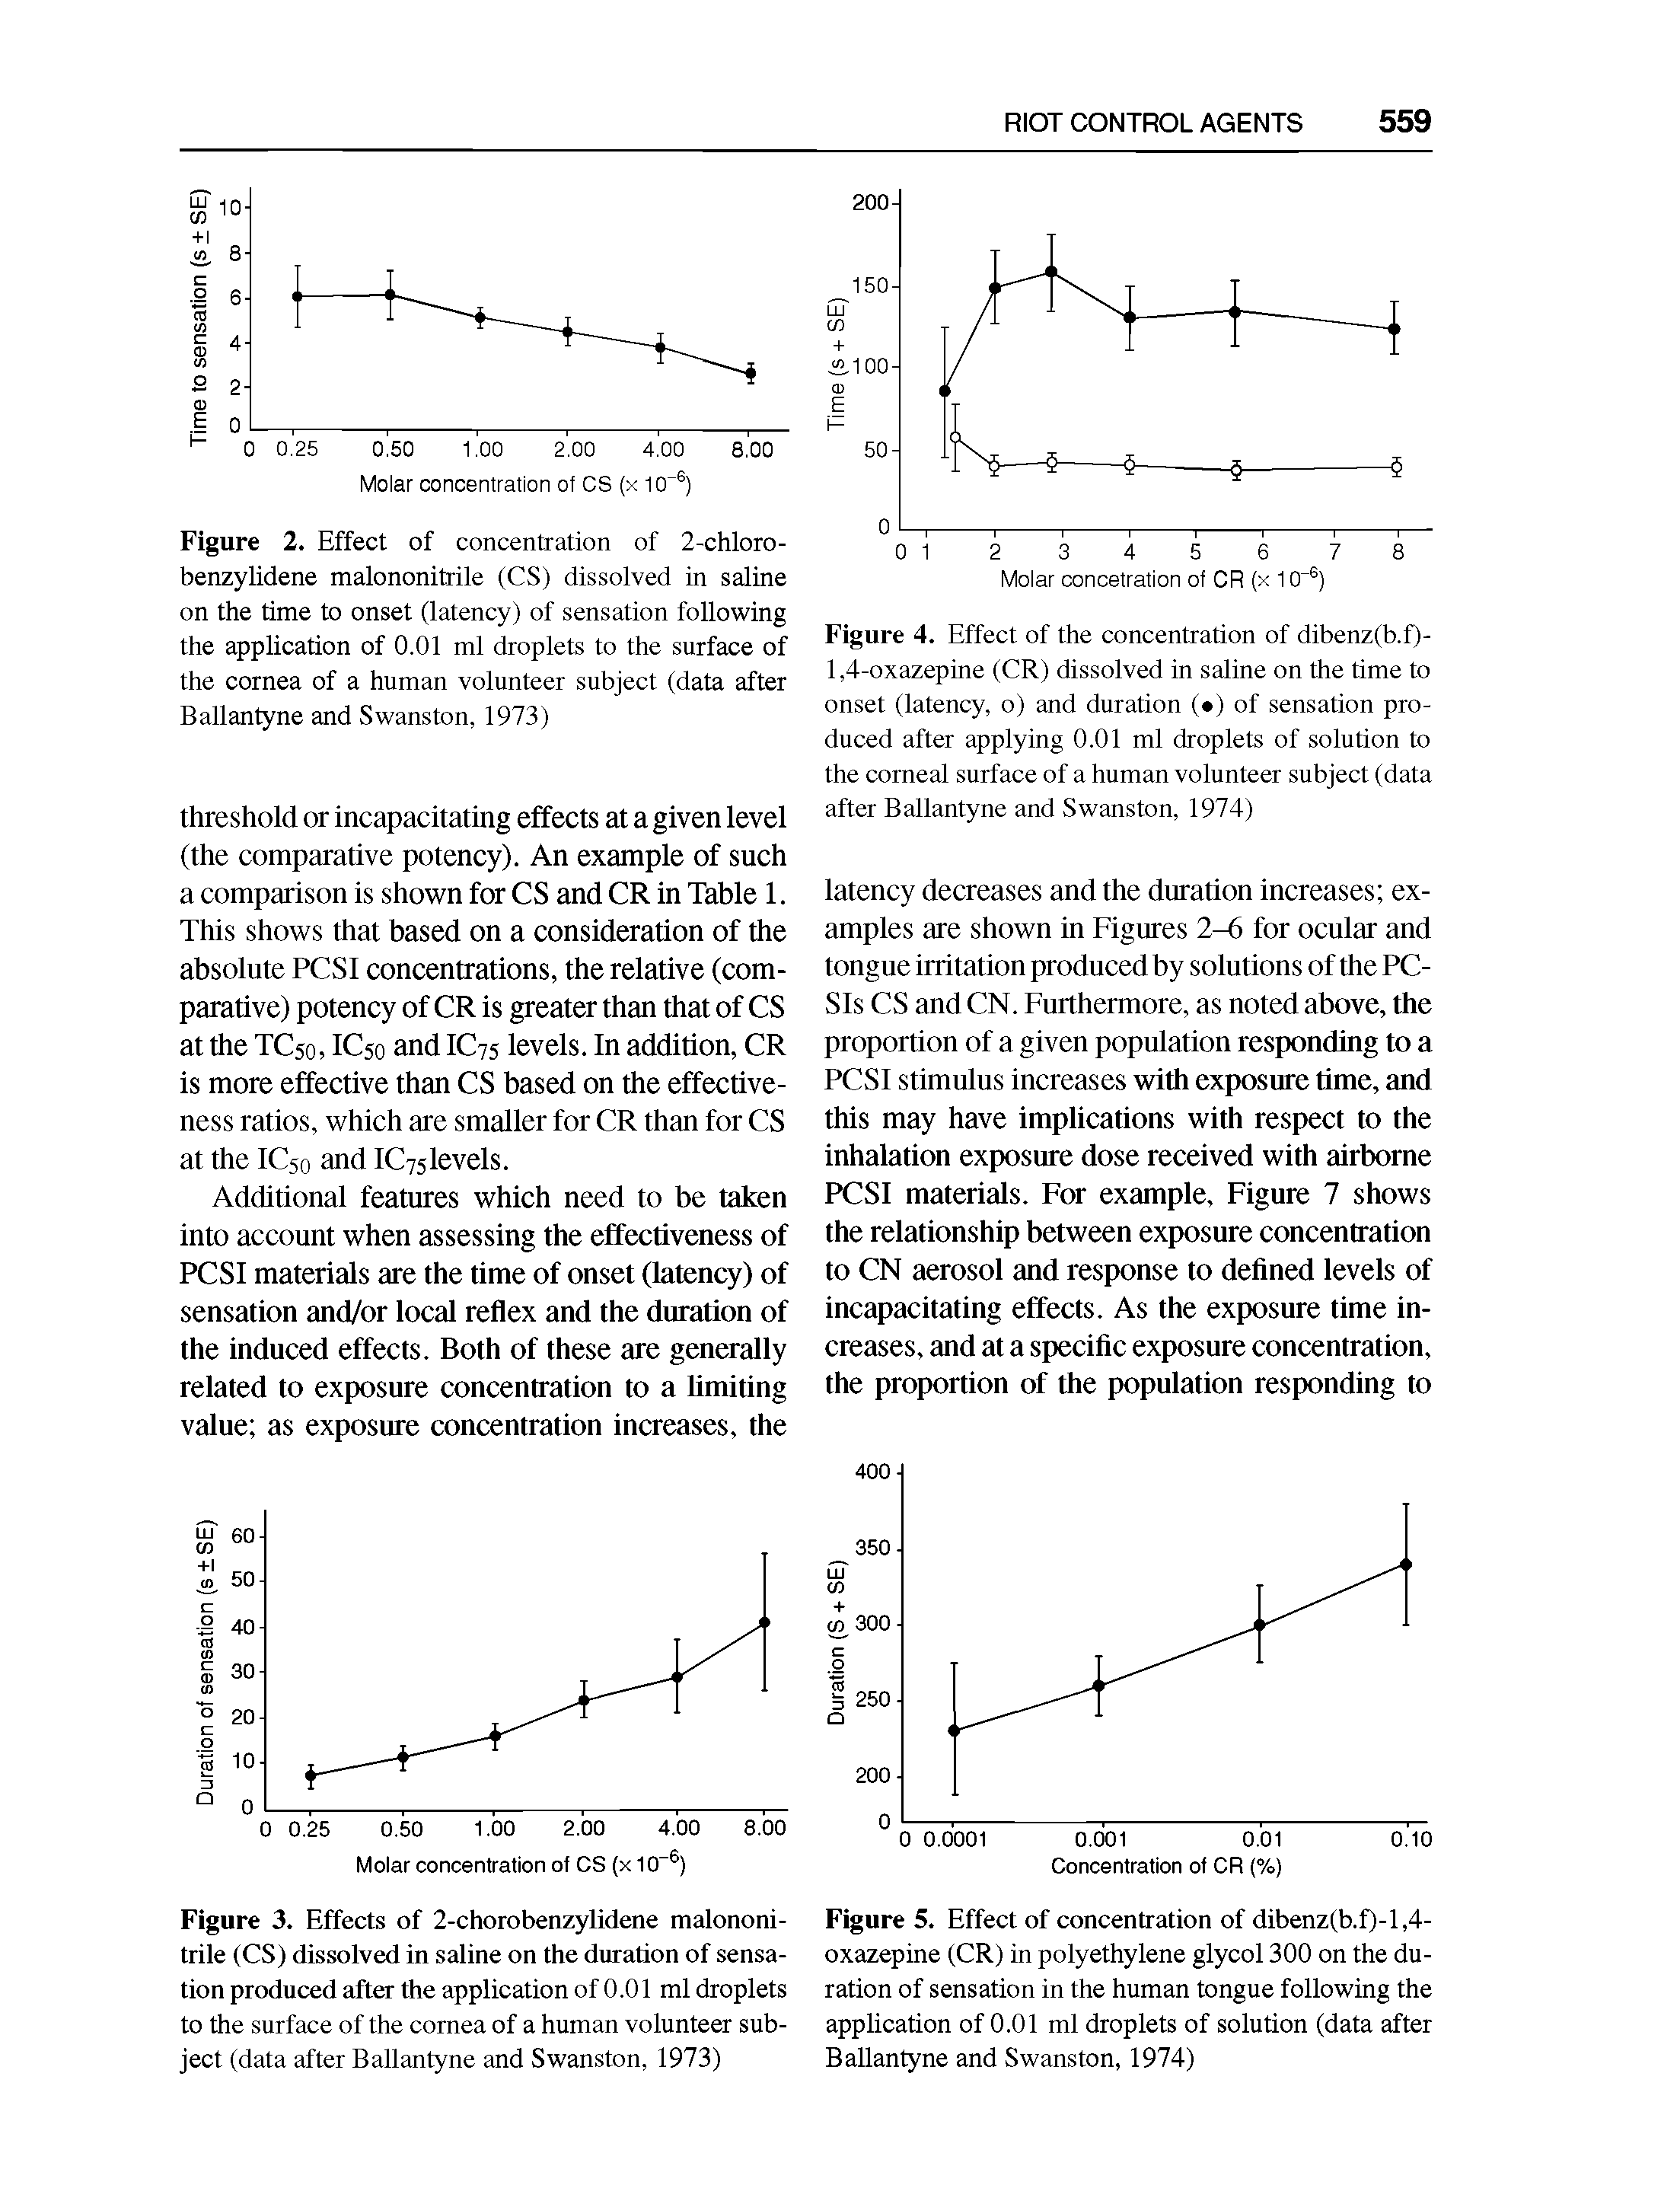 Figure 2. Effect of concentration of 2-chloro-benzylidene malononitrile (CS) dissolved in saline on the time to onset (latency) of sensation following the application of 0.01 ml droplets to the surface of the cornea of a human volunteer subject (data after Ballantyne and Swanston, 1973)...